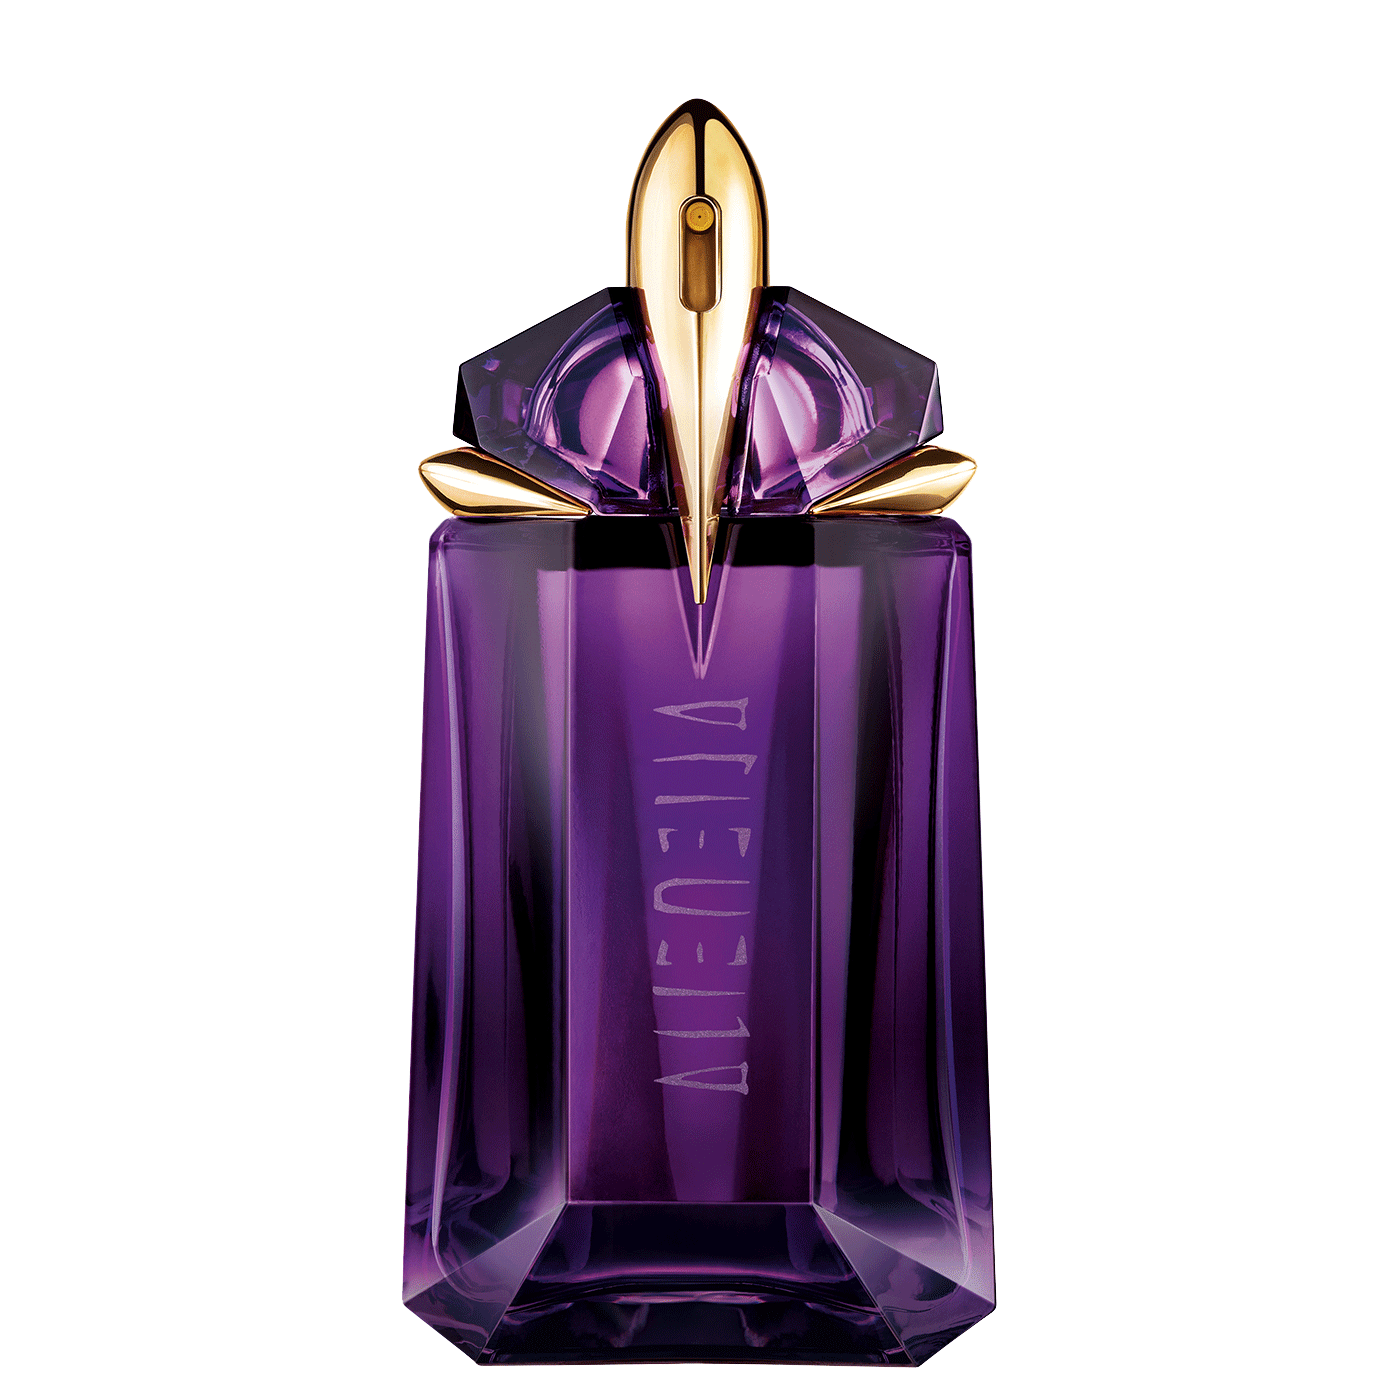 Thierry Mugler Quote: “I want something mouthwatering and tasty which  reminds me of childhood. The scent of a fairground, candy floss, little  c...”